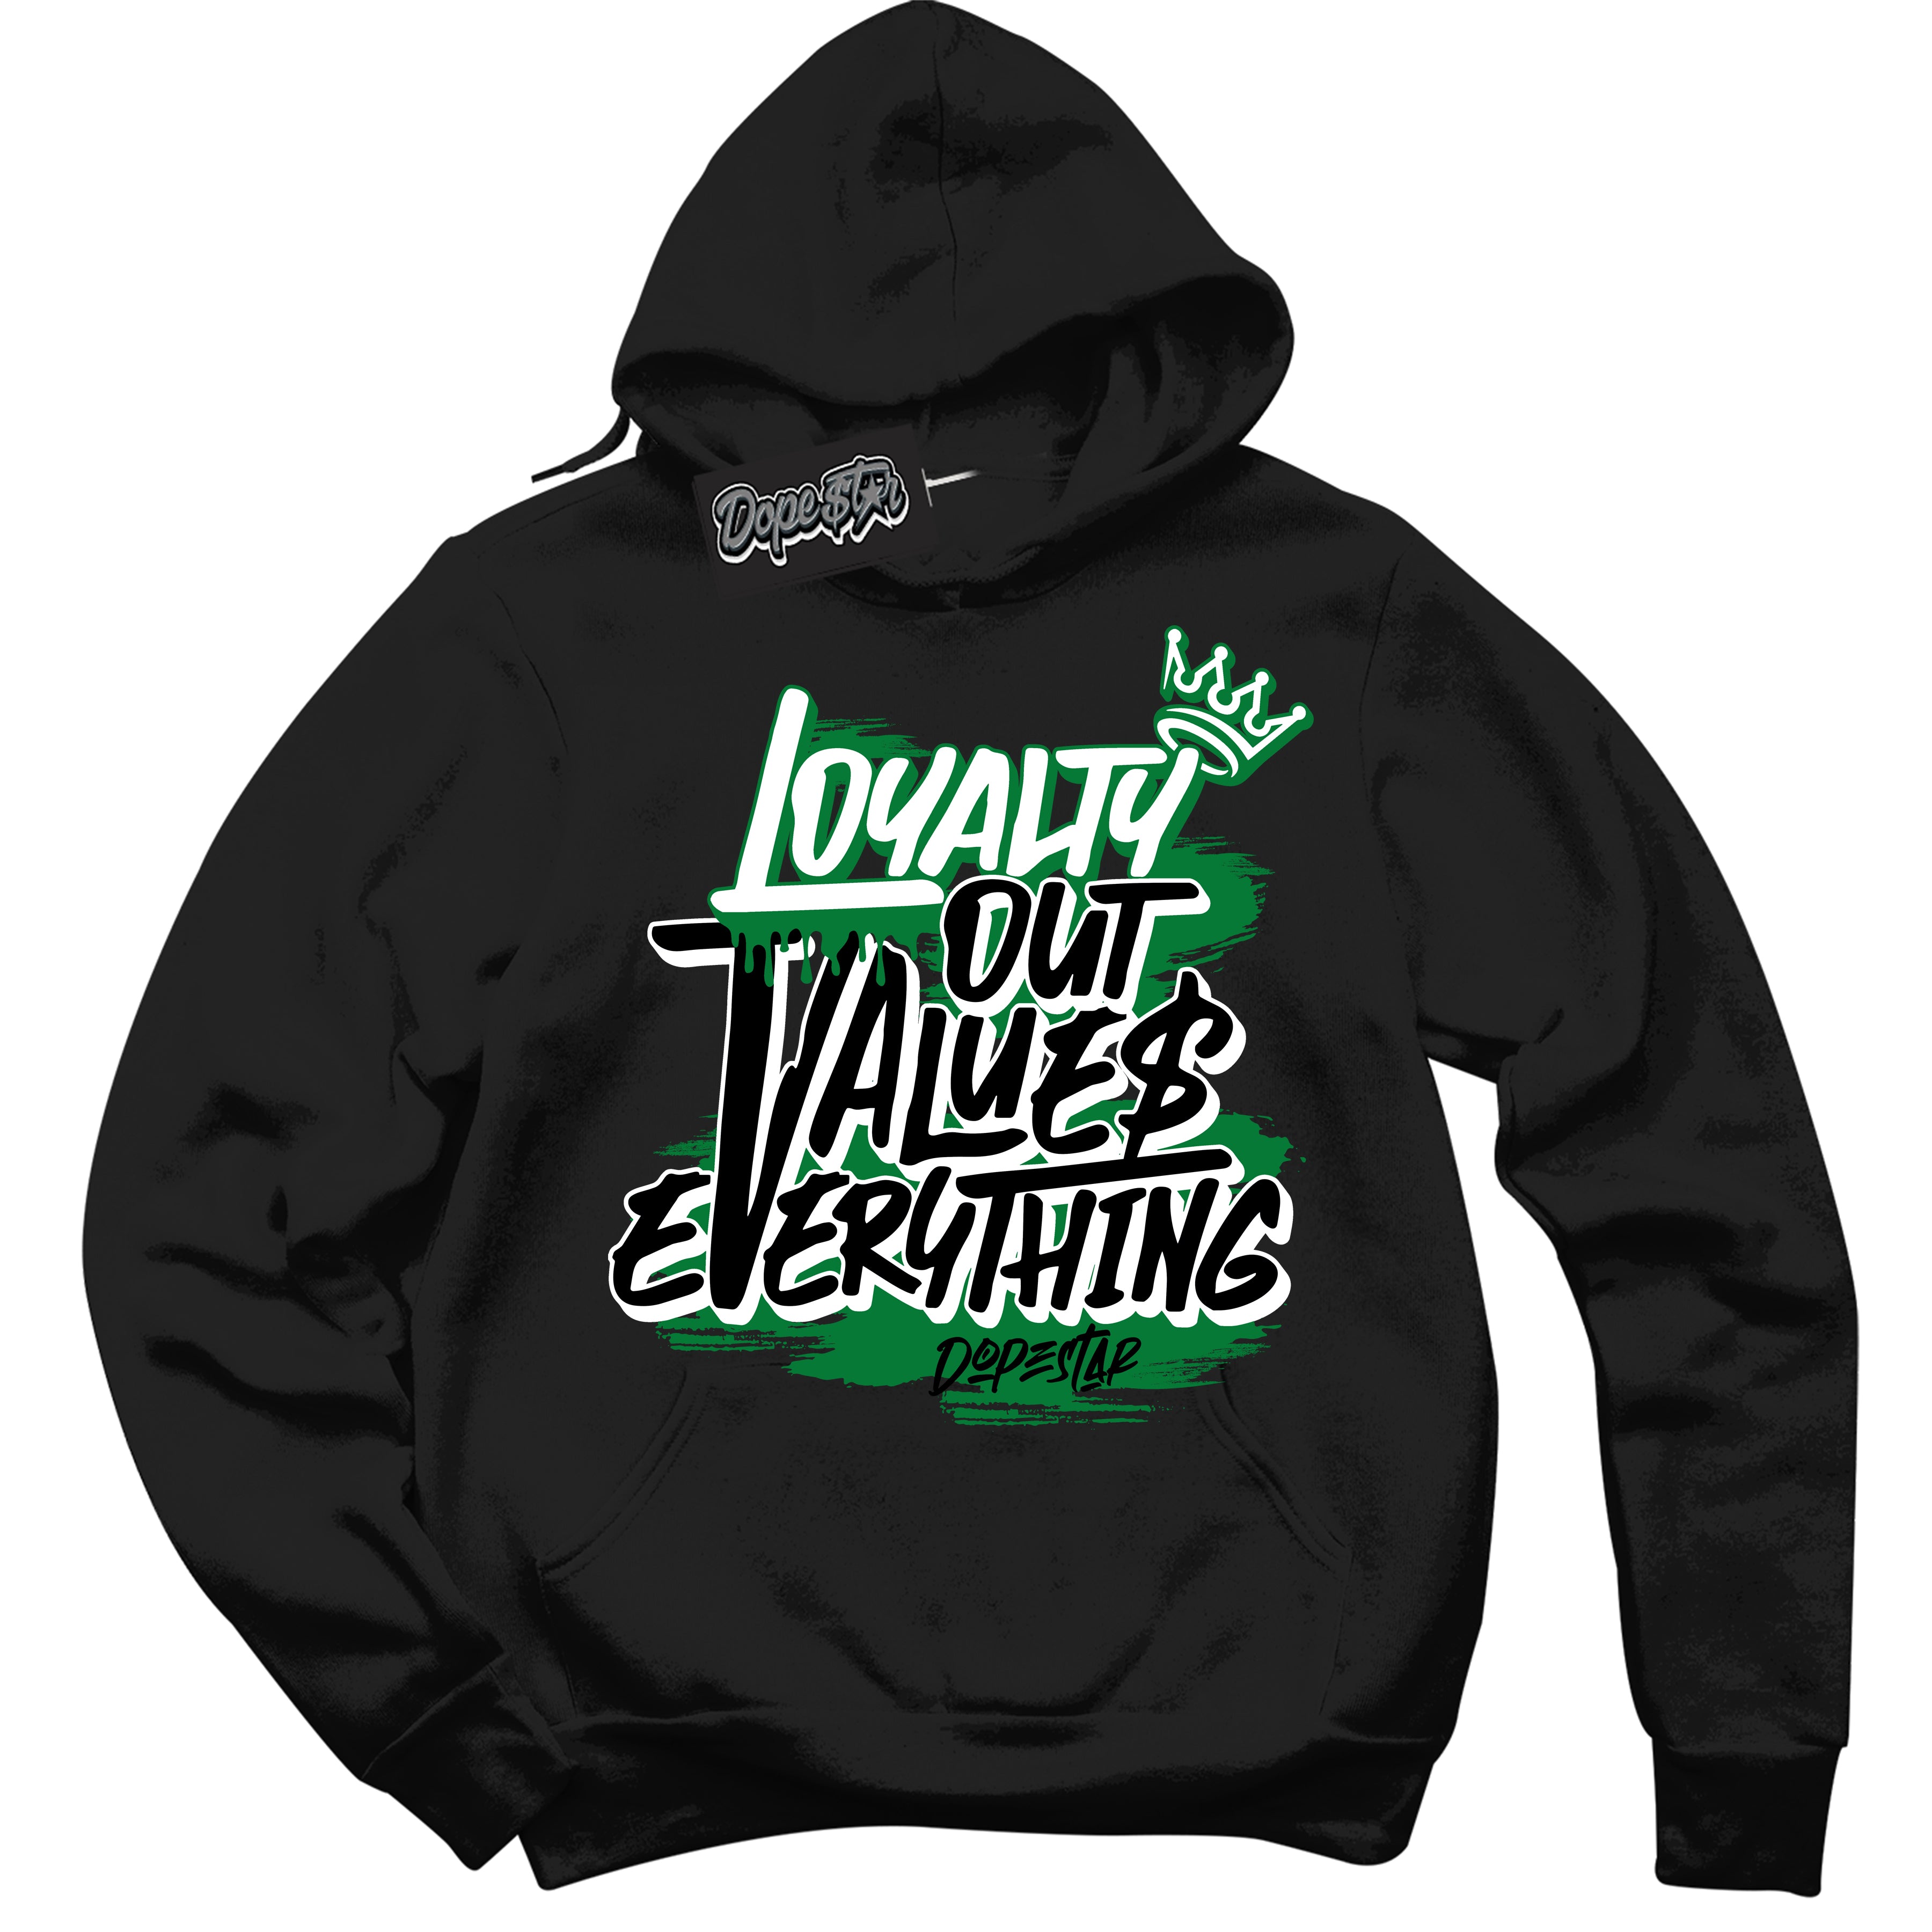 Cool Black Hoodie with “ Loyalty Out Values Everything ”  design that Perfectly Matches  Rings Lucky Green 6s Sneakers.